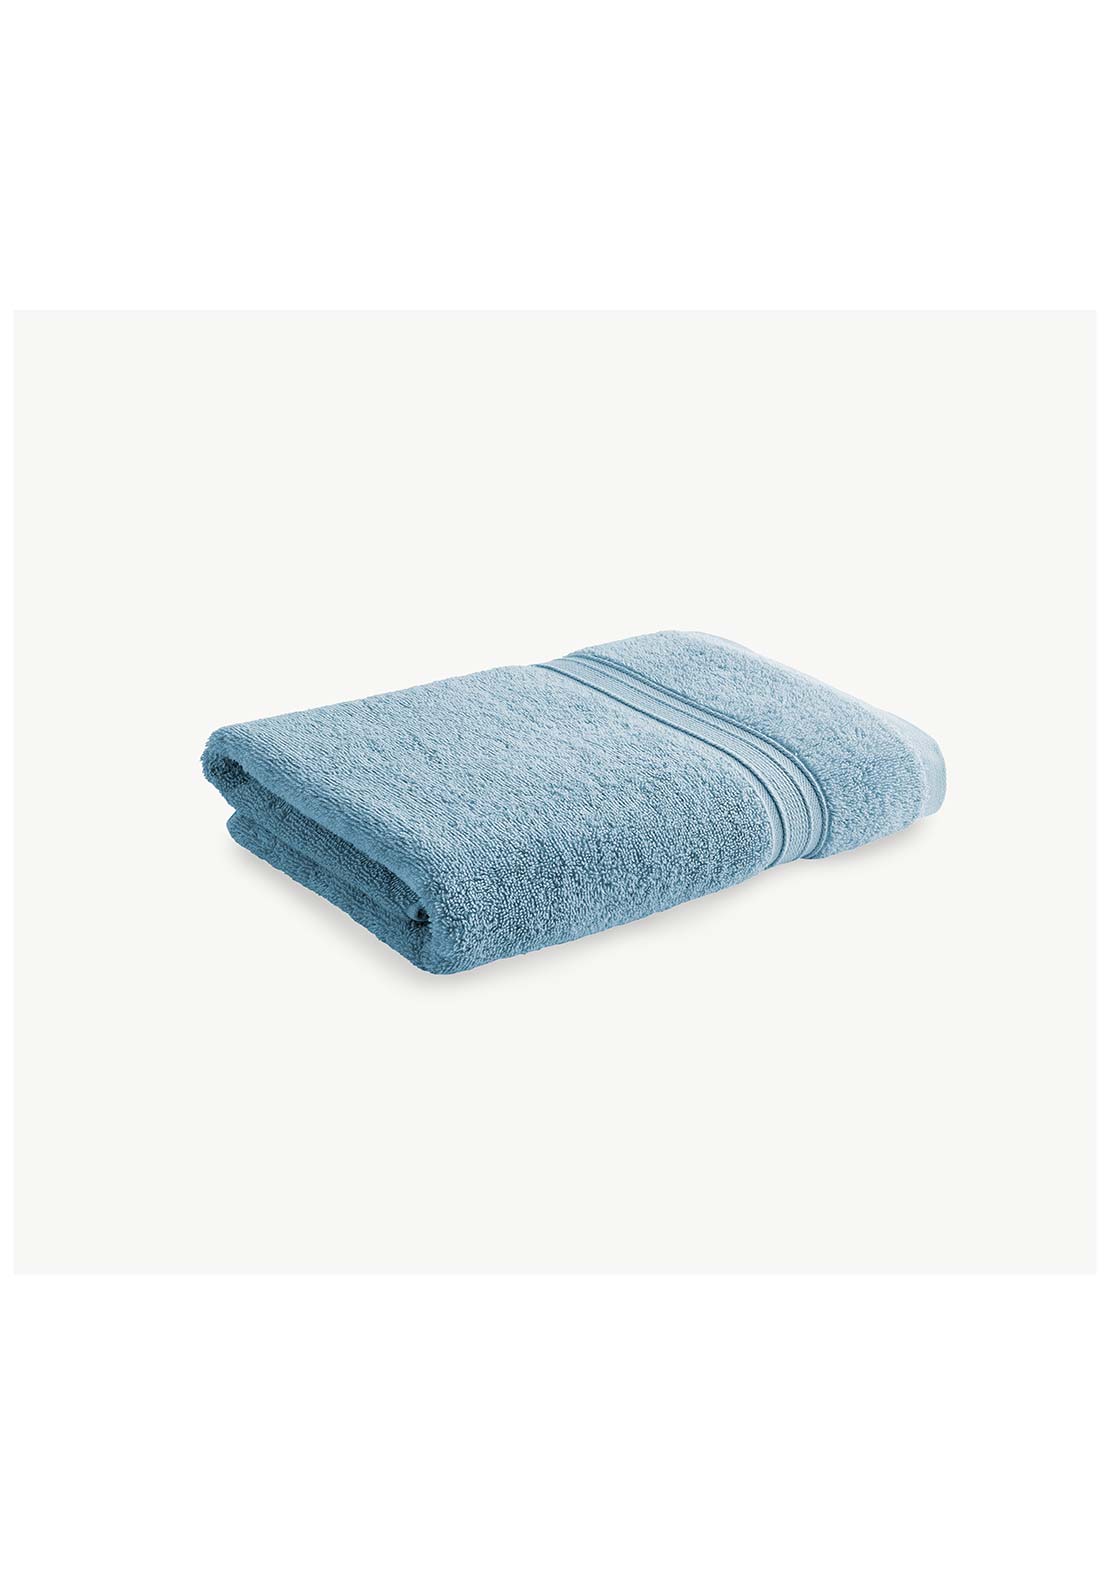 Christy Serene Hand Towel 1 Shaws Department Stores